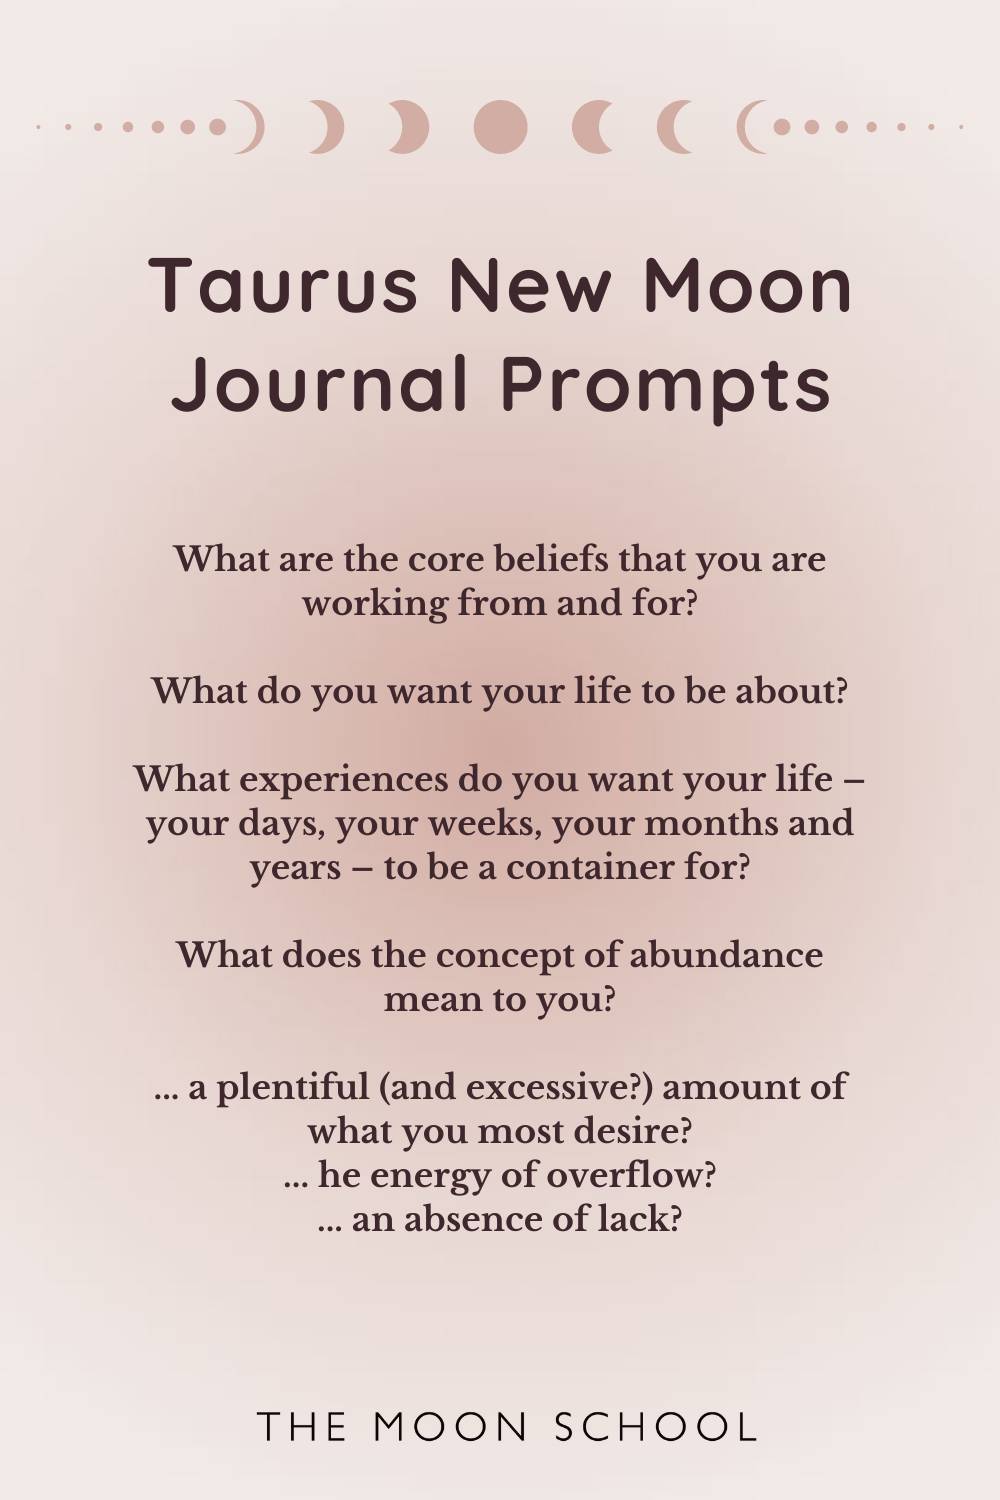 Writing prompts for the Taurus New Moon